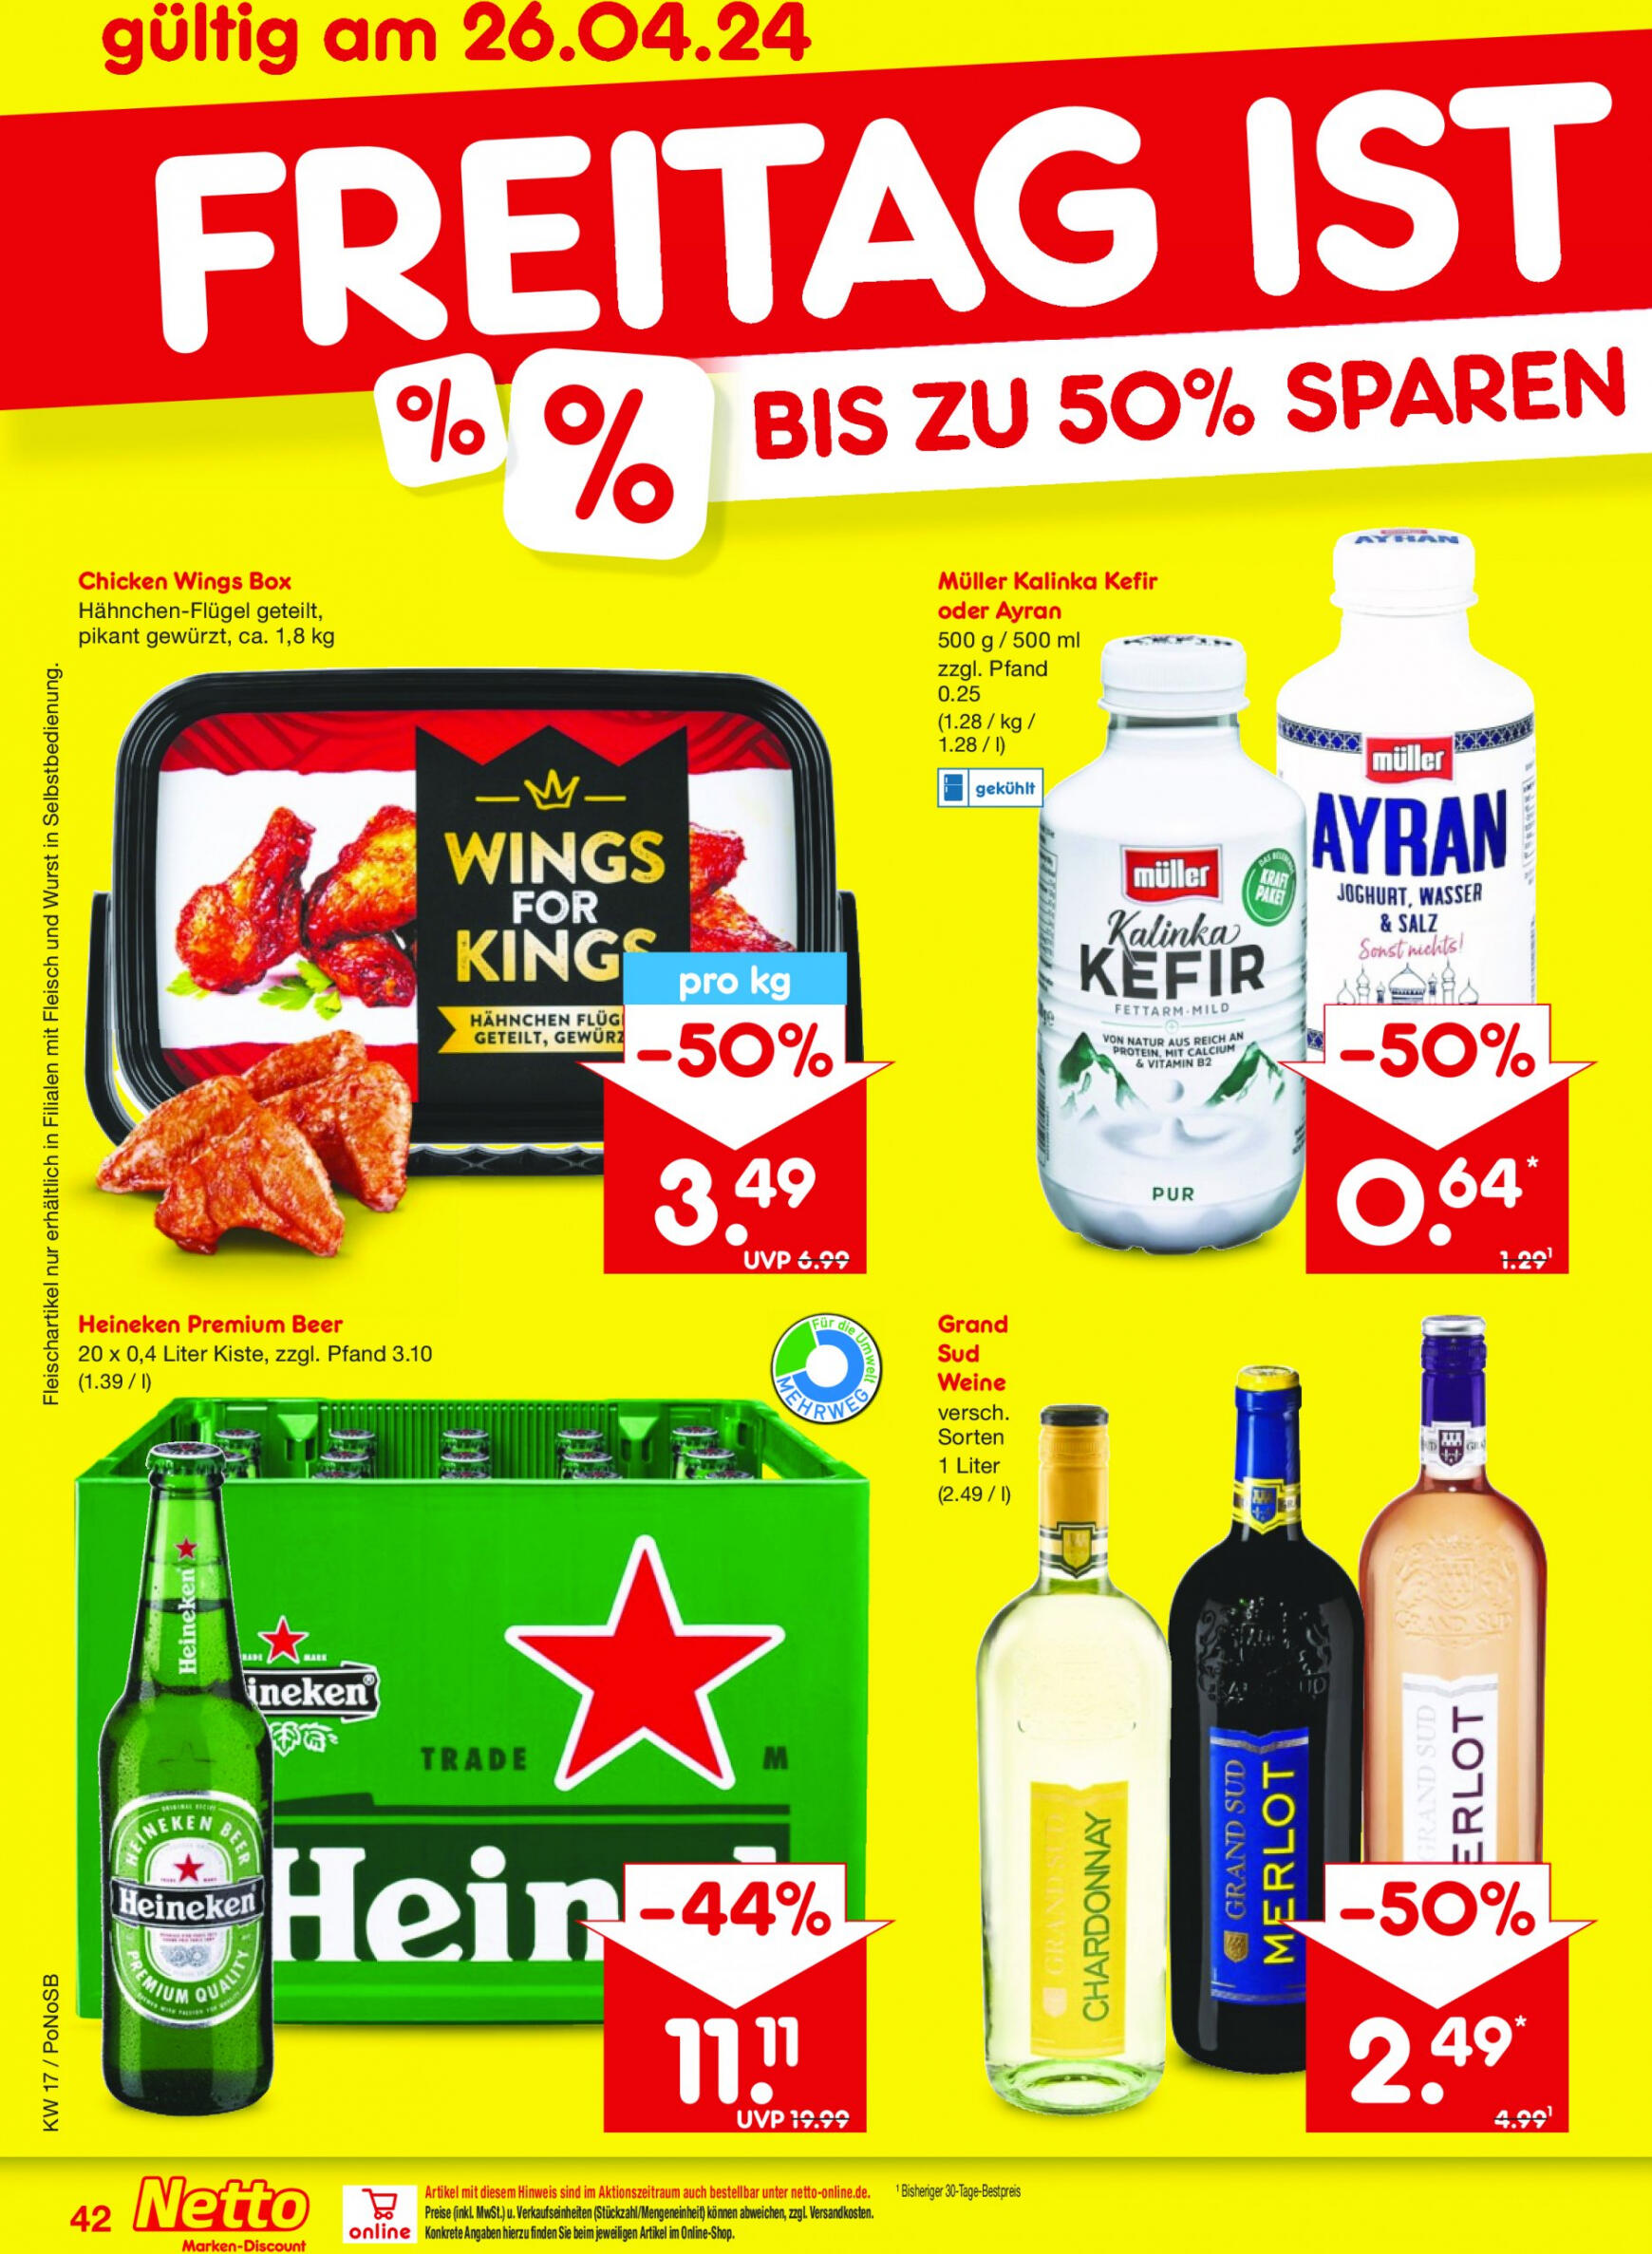 netto - Flyer Netto aktuell 22.04. - 27.04. - page: 48